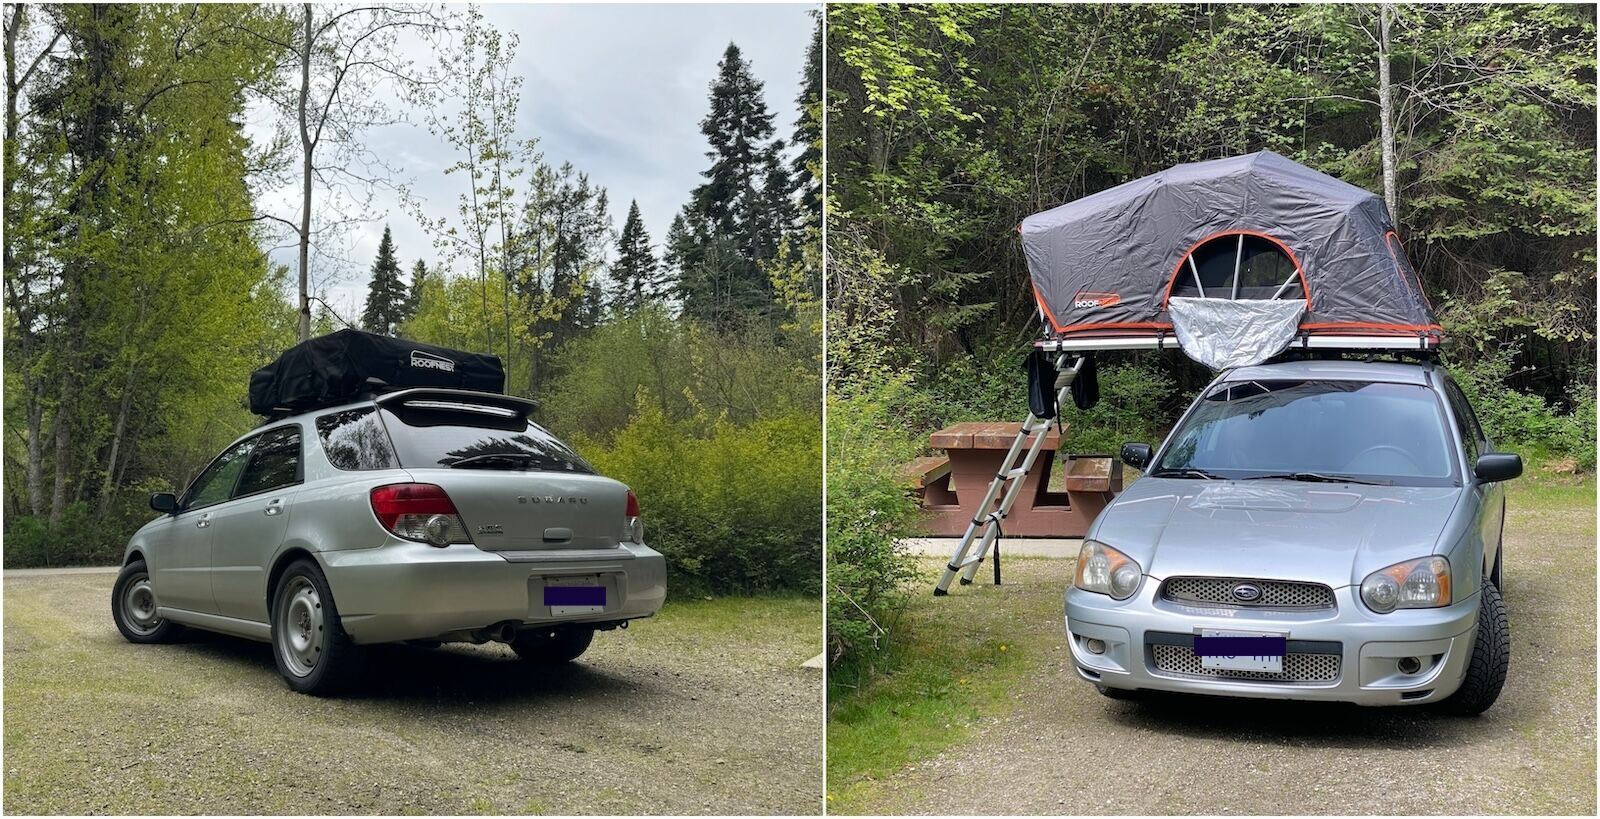 This rooftop tent makes camping road trips easy even with a small car